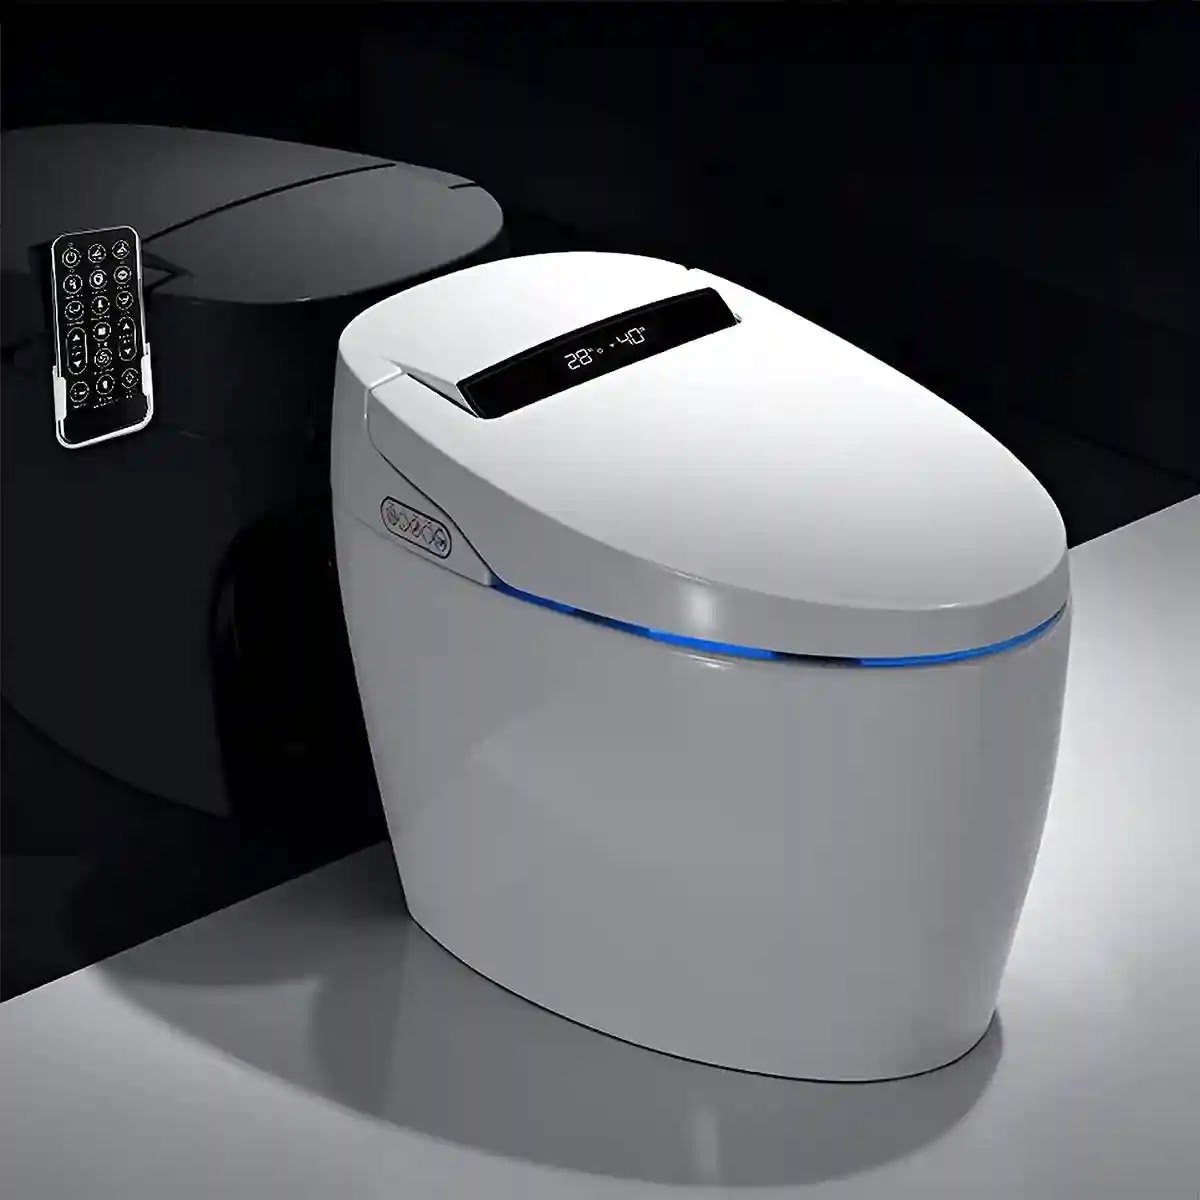 Plantex Smart Toilet/Commode: A Revolutionary Bathroom Upgrade for Home, Office, and Hotel Spaces